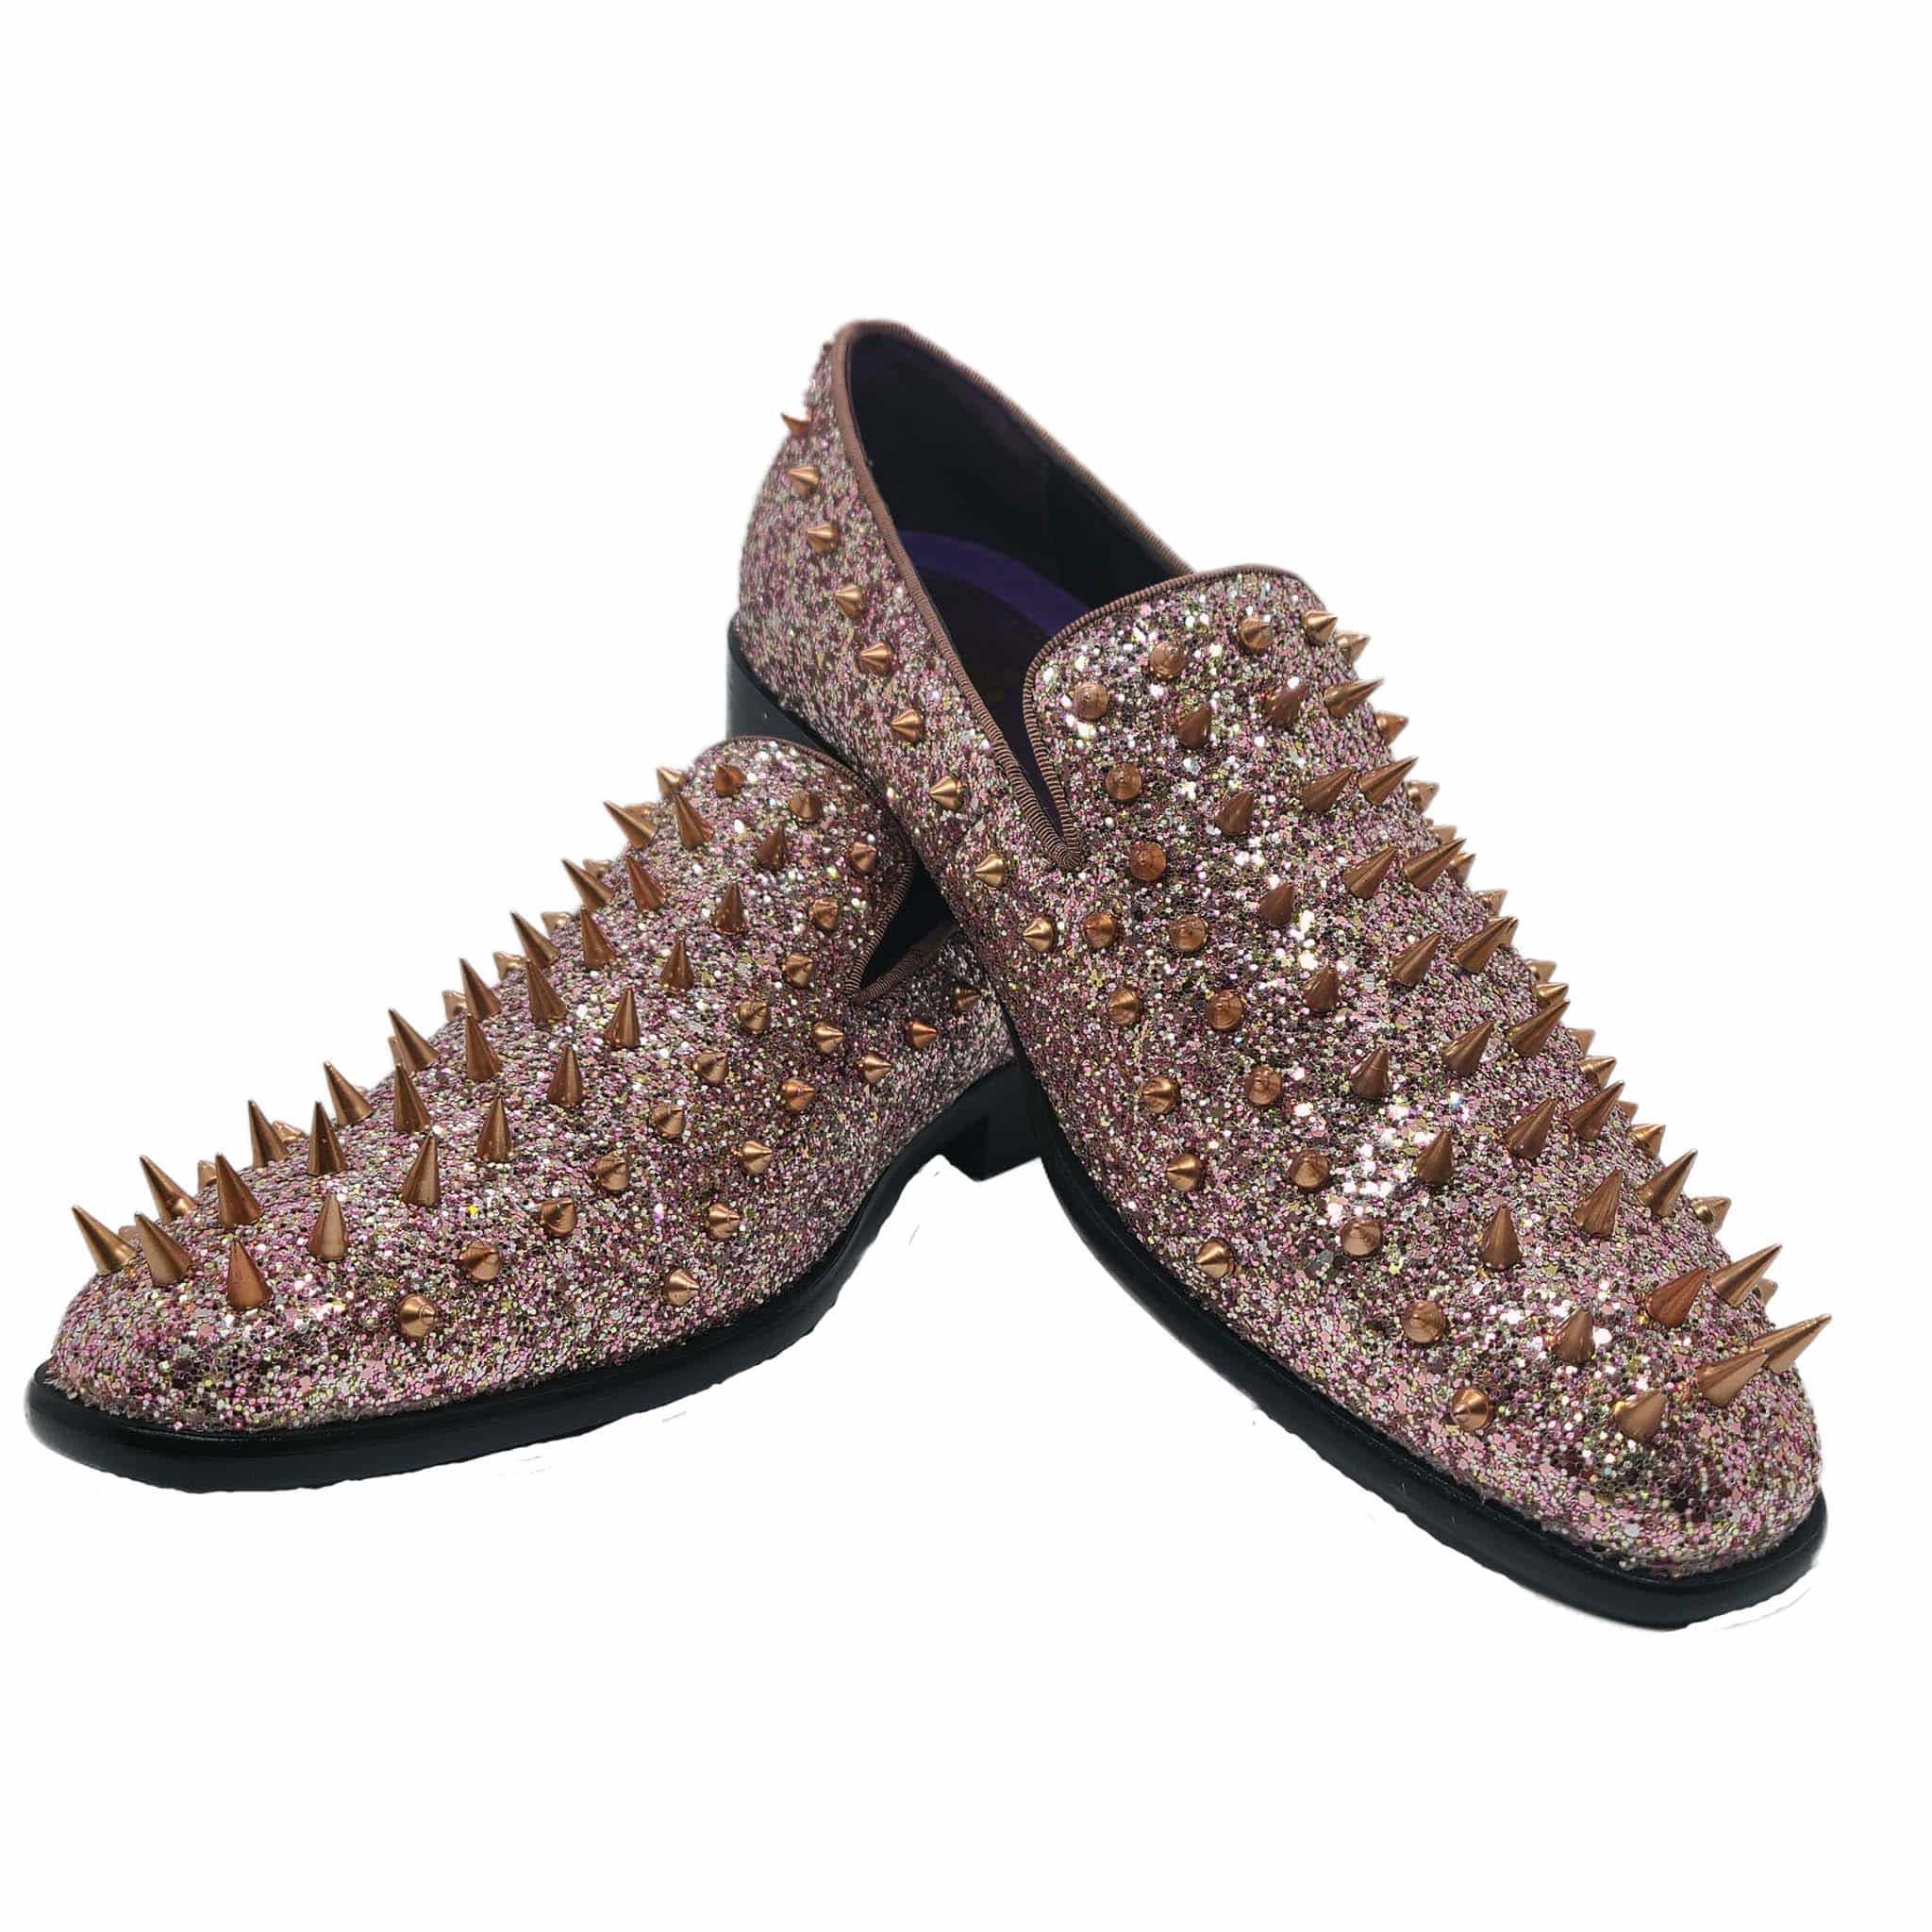 Men's Spiked Fashion Loafers in Rose Gold | D&K SUIT DISCOUNTERS